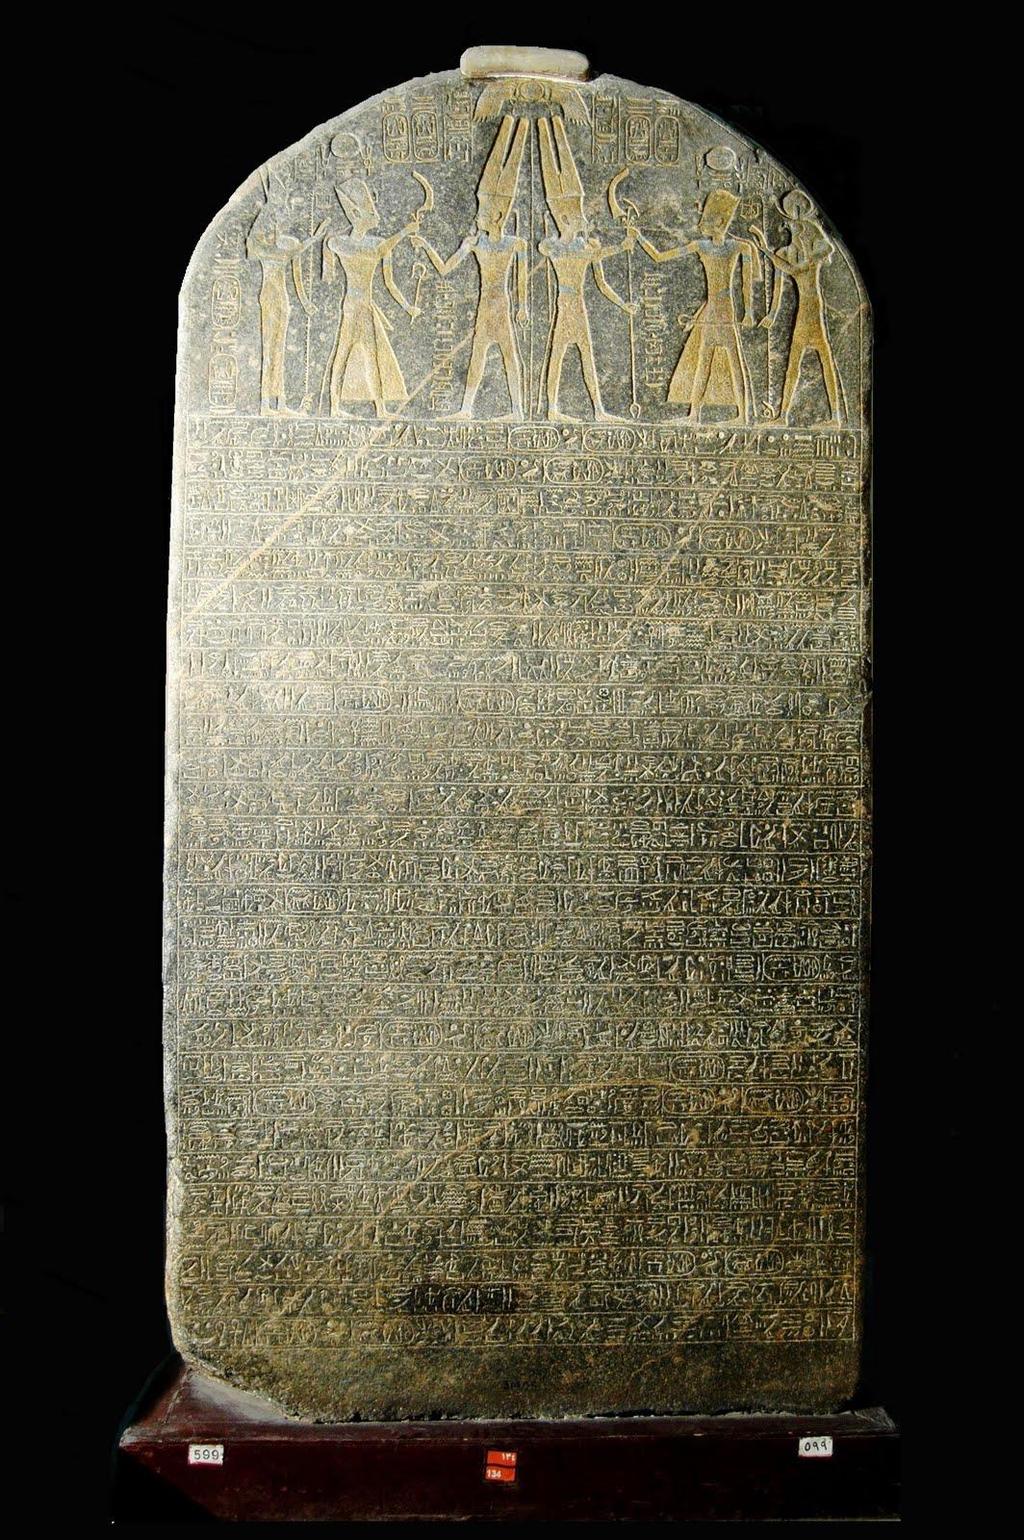 The Merneptah Stele ca. 1210 BC The renowned British archaeologist Flinders Petrie discovered the Merneptah Stele at Thebes in 1896. Israel is laid waste, his seed is not.